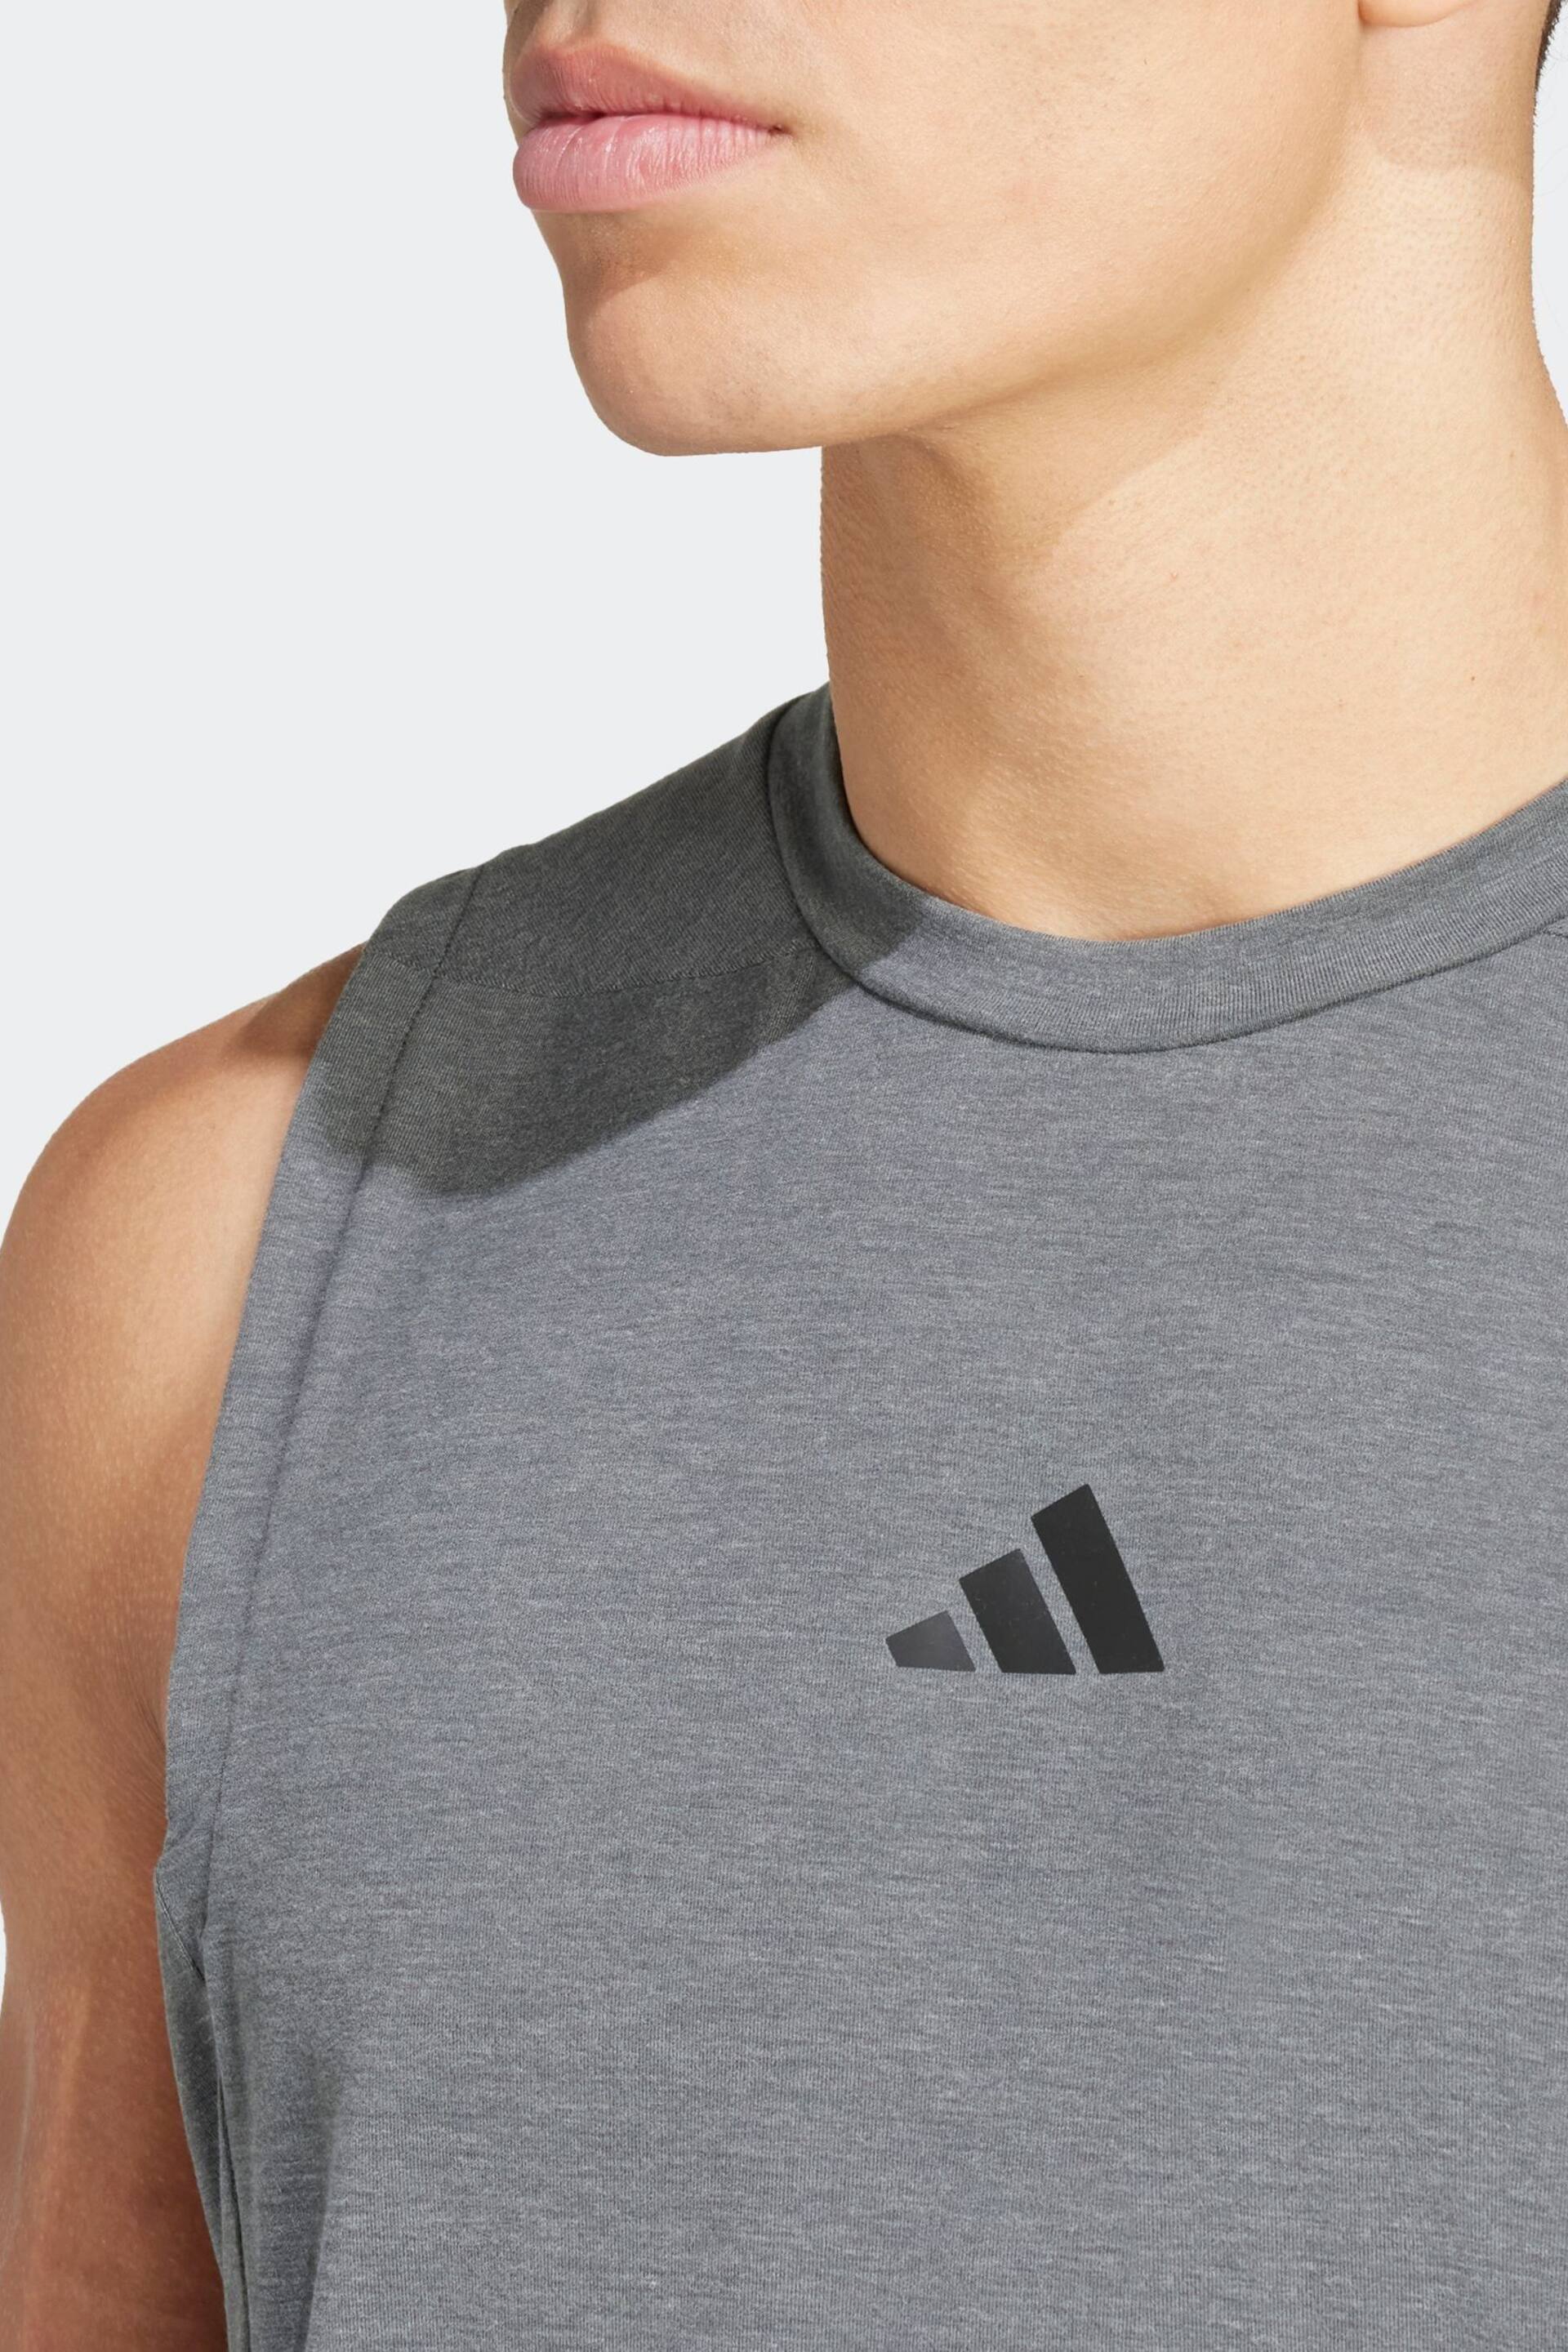 adidas Dark Grey Designed for Training Workout Tank Top - Image 5 of 7